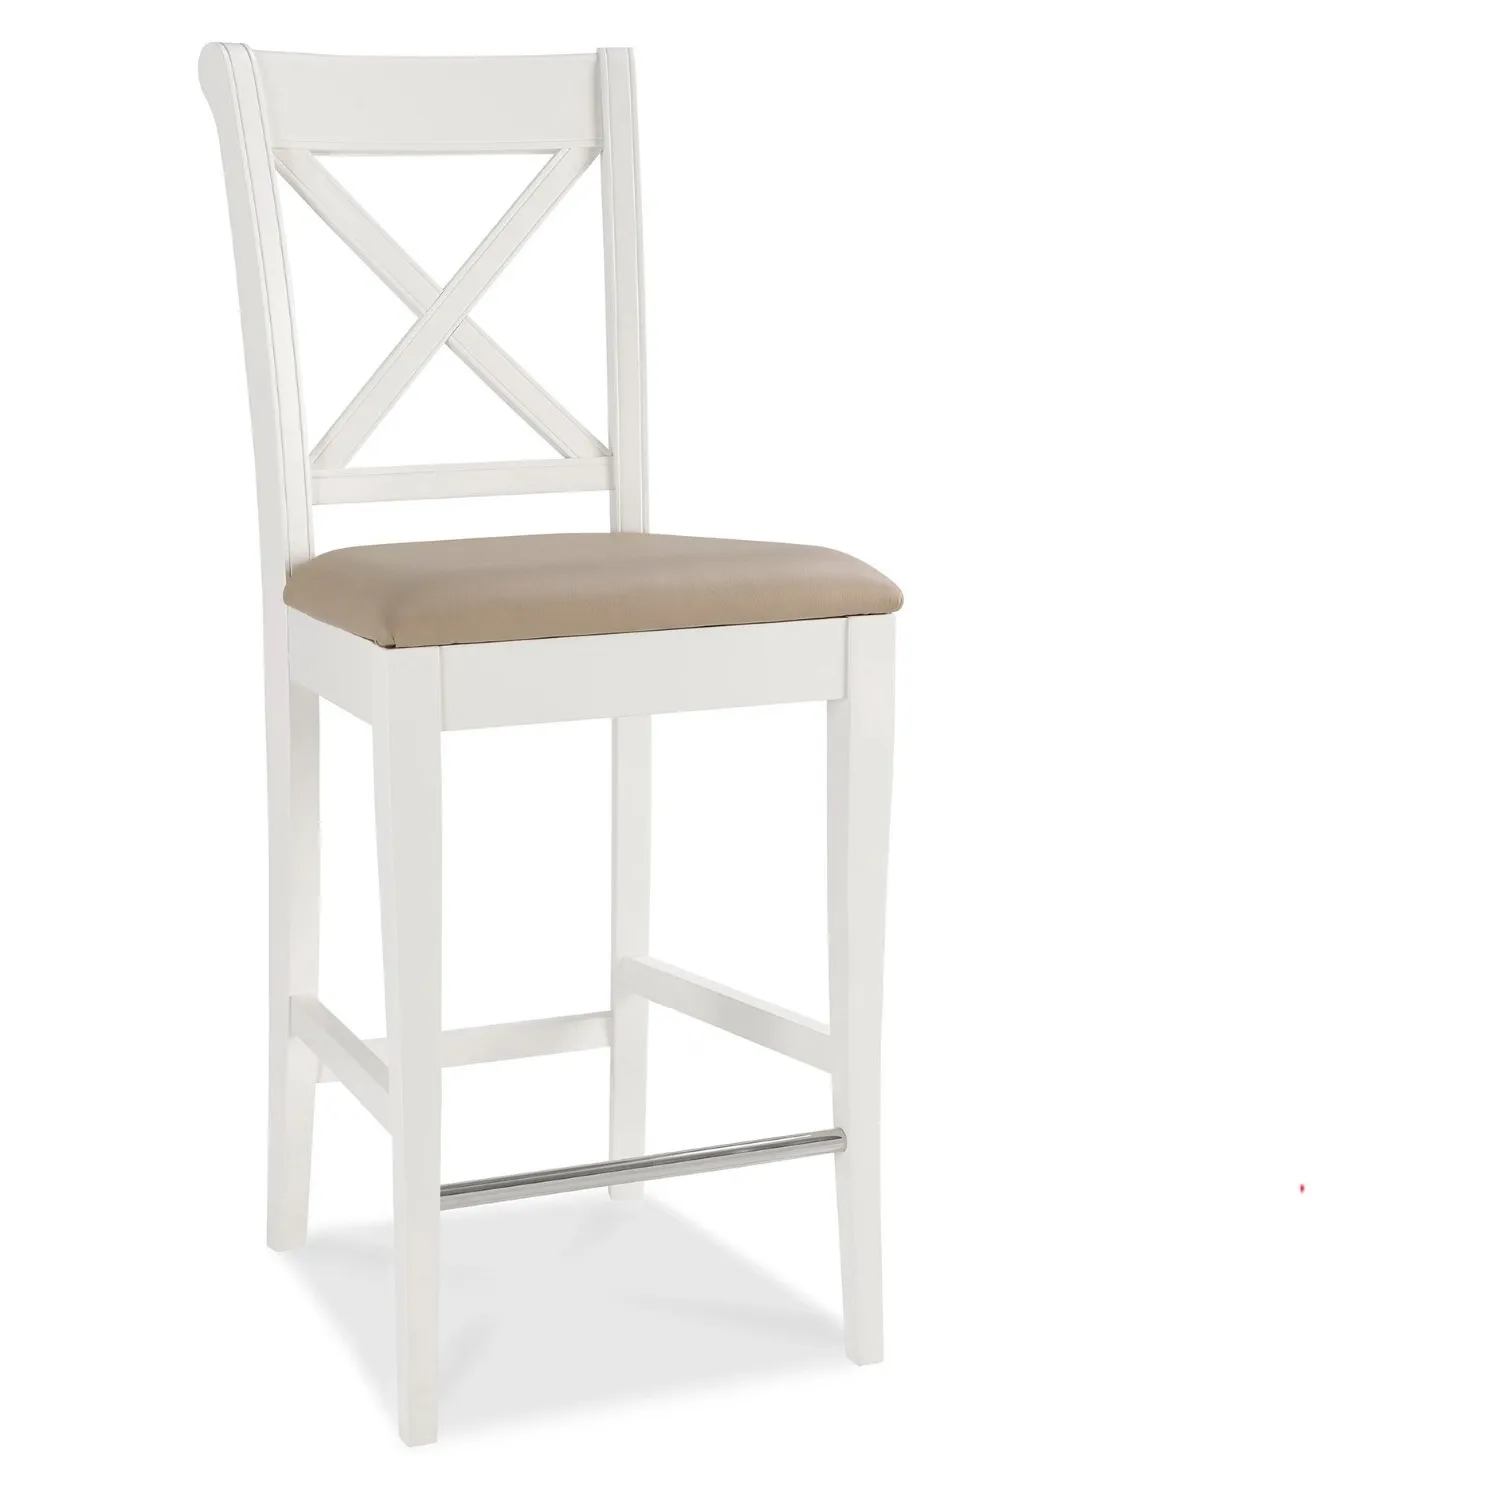 White Painted X Back Bar Stool Cream Leather Seat